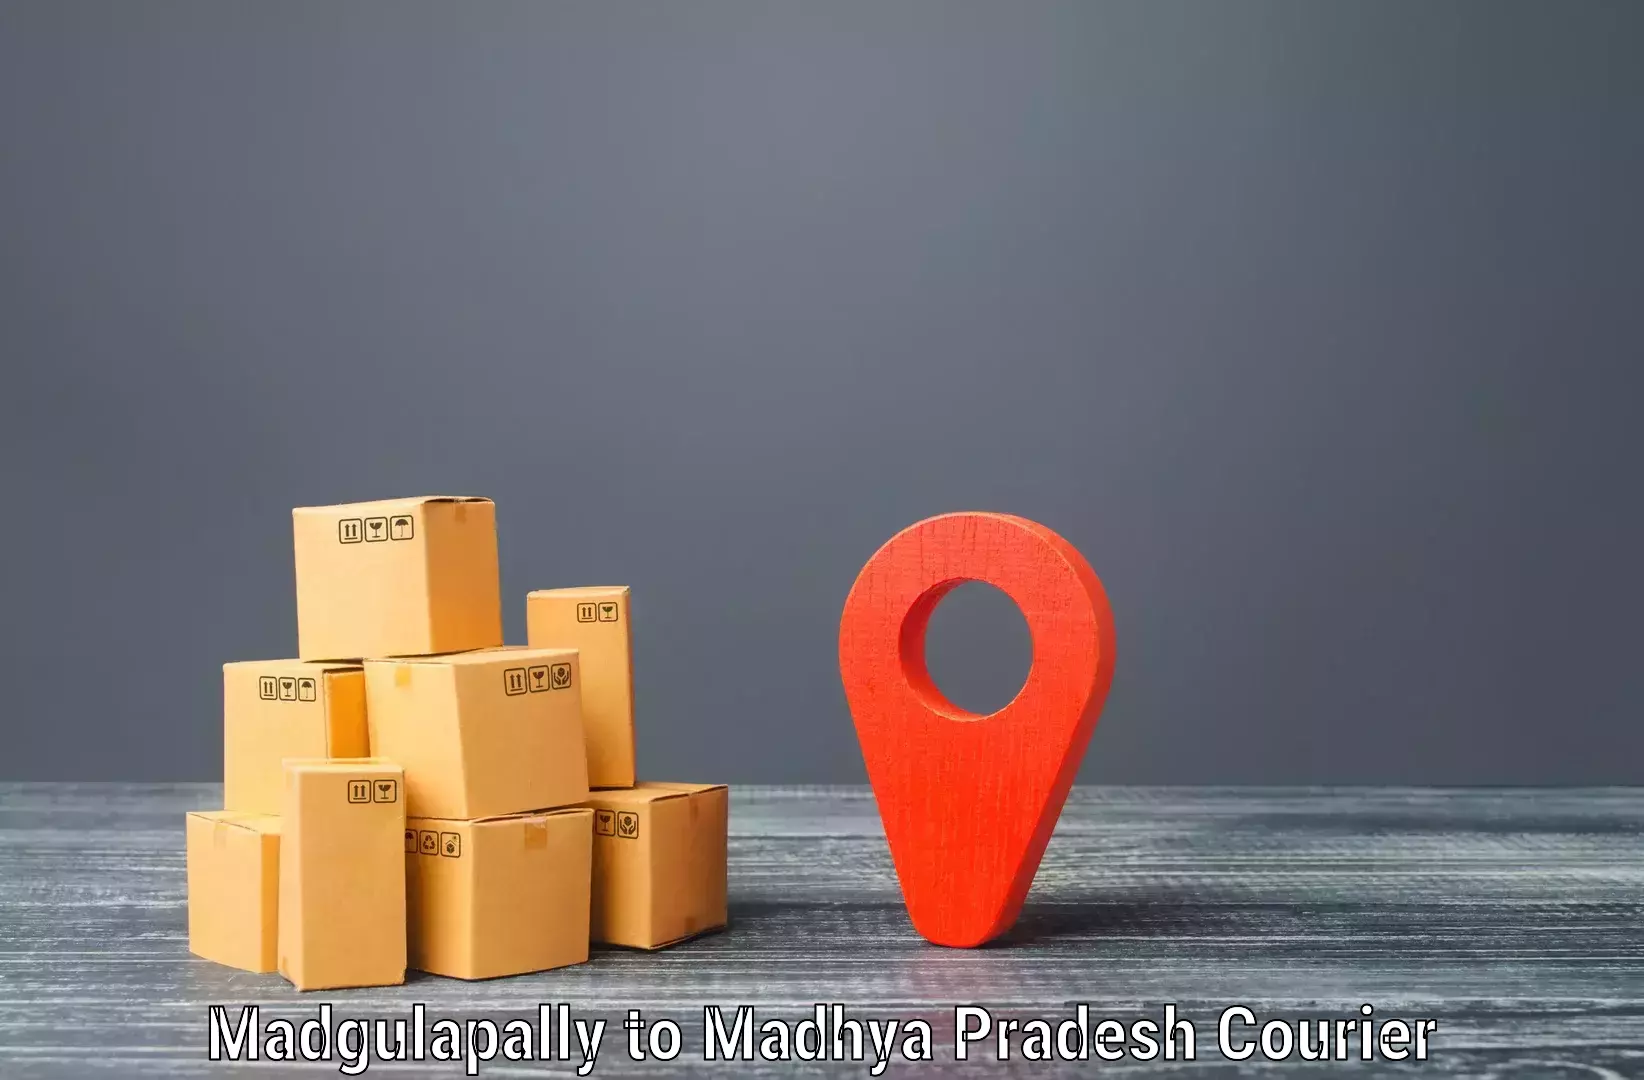 Multi-national courier services Madgulapally to Chandla